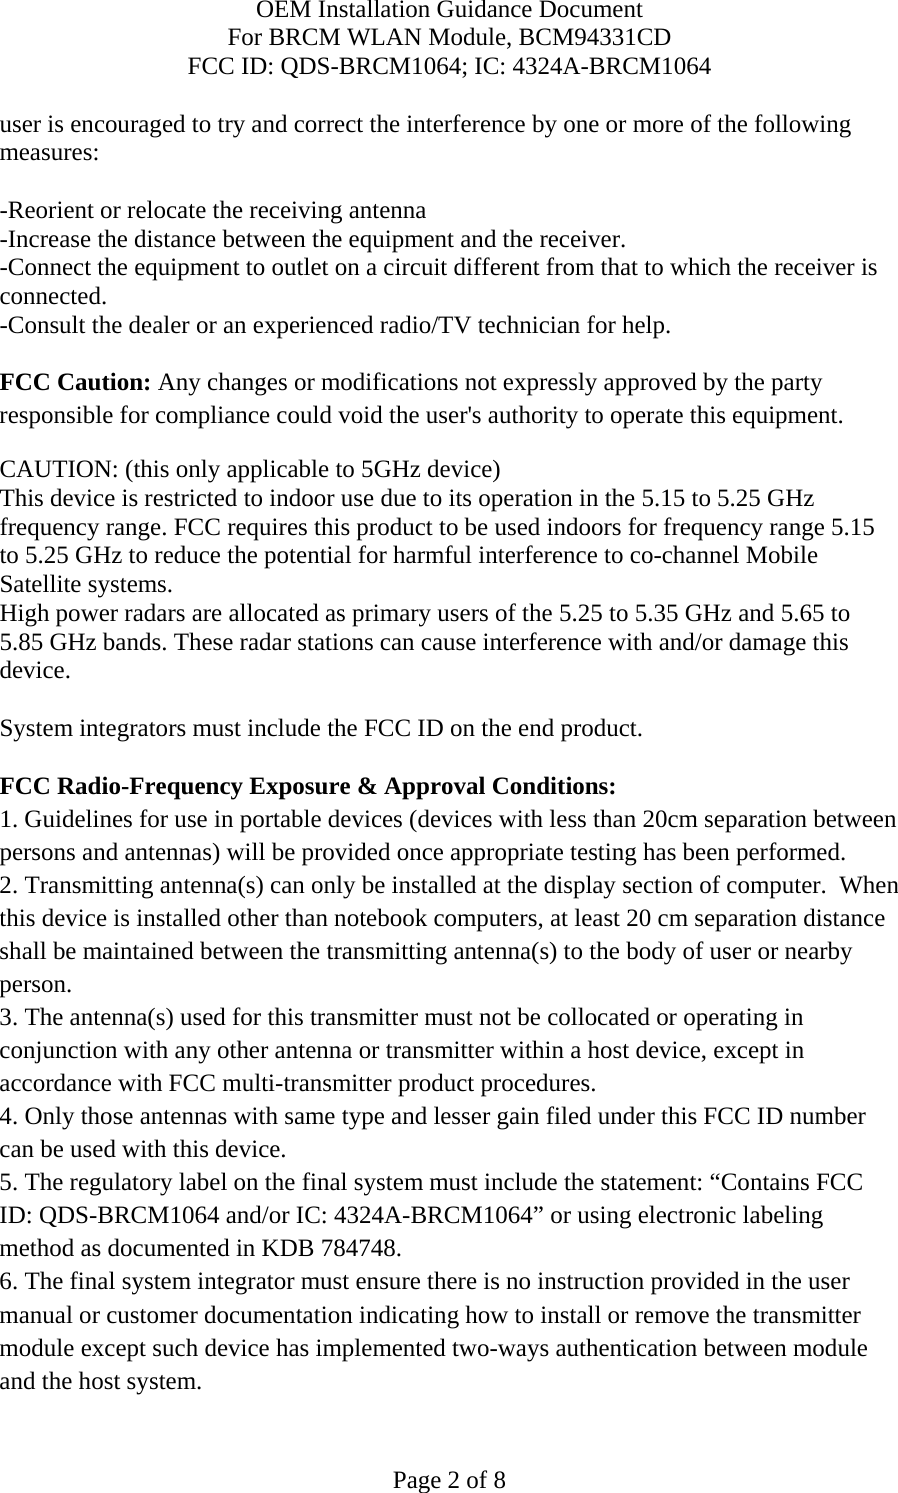 OEM Installation Guidance Document For BRCM WLAN Module, BCM94331CD FCC ID: QDS-BRCM1064; IC: 4324A-BRCM1064  Page 2 of 8 user is encouraged to try and correct the interference by one or more of the following measures:   -Reorient or relocate the receiving antenna -Increase the distance between the equipment and the receiver. -Connect the equipment to outlet on a circuit different from that to which the receiver is connected. -Consult the dealer or an experienced radio/TV technician for help.  FCC Caution: Any changes or modifications not expressly approved by the party responsible for compliance could void the user&apos;s authority to operate this equipment. CAUTION: (this only applicable to 5GHz device) This device is restricted to indoor use due to its operation in the 5.15 to 5.25 GHz frequency range. FCC requires this product to be used indoors for frequency range 5.15 to 5.25 GHz to reduce the potential for harmful interference to co-channel Mobile Satellite systems. High power radars are allocated as primary users of the 5.25 to 5.35 GHz and 5.65 to 5.85 GHz bands. These radar stations can cause interference with and/or damage this device.  System integrators must include the FCC ID on the end product.   FCC Radio-Frequency Exposure &amp; Approval Conditions: 1. Guidelines for use in portable devices (devices with less than 20cm separation between persons and antennas) will be provided once appropriate testing has been performed. 2. Transmitting antenna(s) can only be installed at the display section of computer.  When this device is installed other than notebook computers, at least 20 cm separation distance shall be maintained between the transmitting antenna(s) to the body of user or nearby person. 3. The antenna(s) used for this transmitter must not be collocated or operating in conjunction with any other antenna or transmitter within a host device, except in accordance with FCC multi-transmitter product procedures. 4. Only those antennas with same type and lesser gain filed under this FCC ID number can be used with this device. 5. The regulatory label on the final system must include the statement: “Contains FCC ID: QDS-BRCM1064 and/or IC: 4324A-BRCM1064” or using electronic labeling method as documented in KDB 784748. 6. The final system integrator must ensure there is no instruction provided in the user manual or customer documentation indicating how to install or remove the transmitter module except such device has implemented two-ways authentication between module and the host system. 